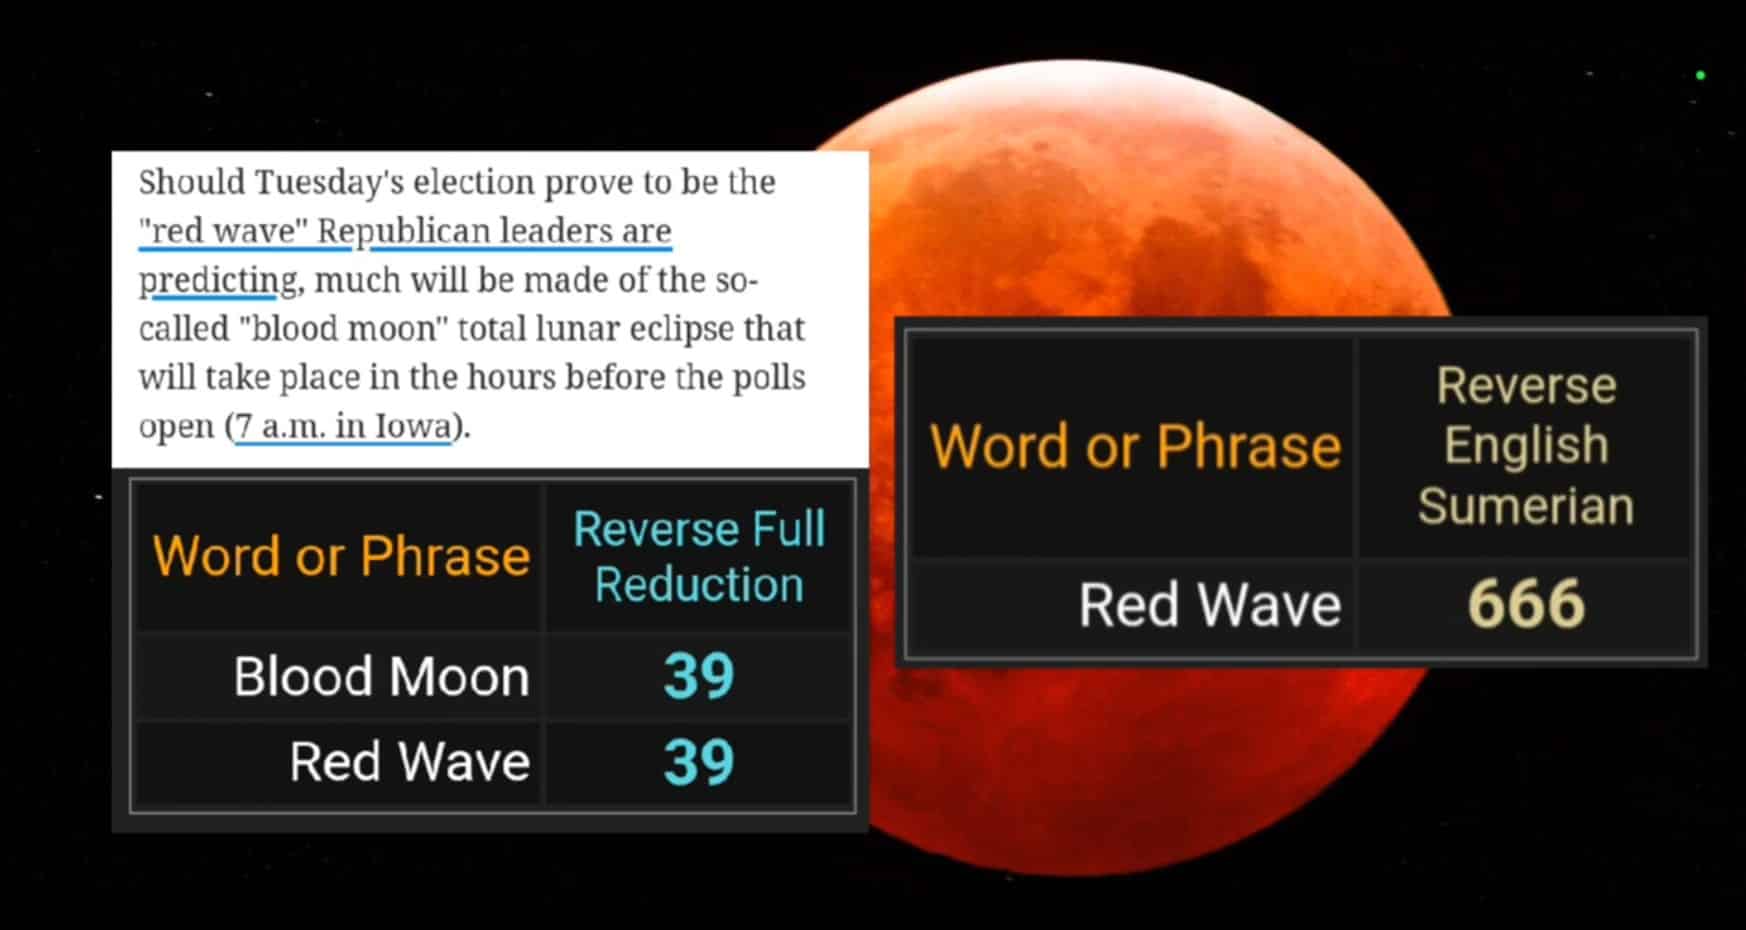 Blood moon - Red Wave = 666